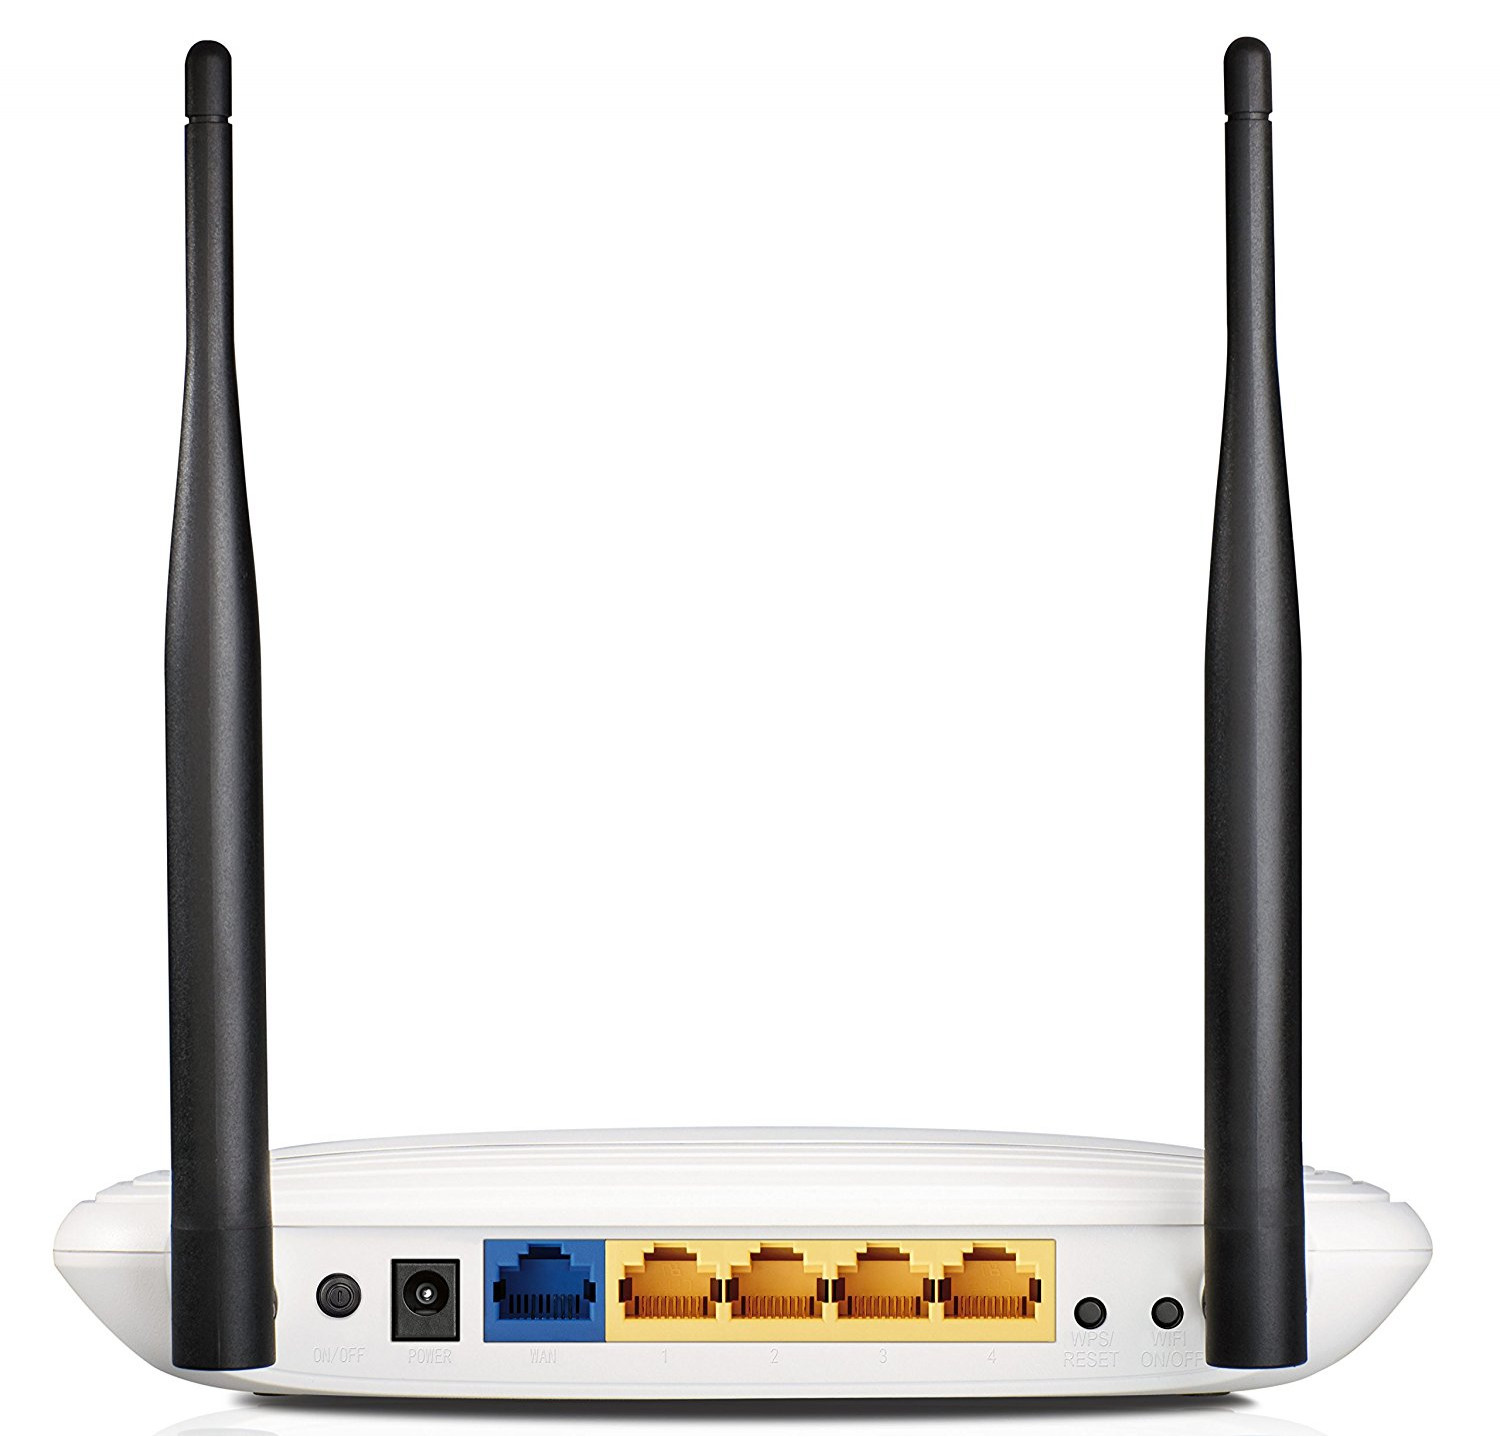  TP LINK 300 Mbps Wireless N Cable Router Easy Setup WPS 